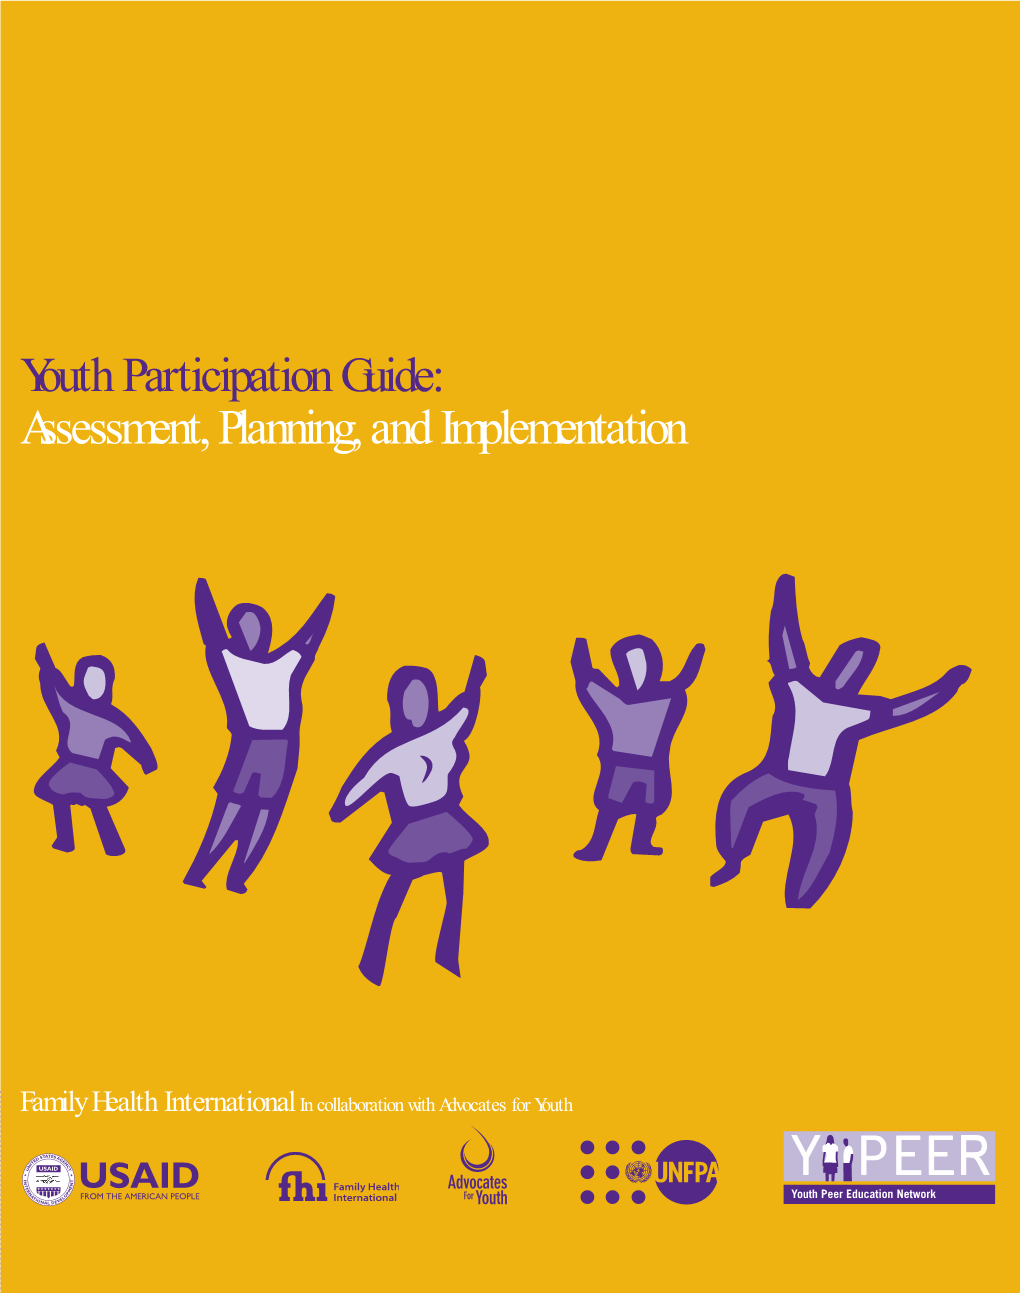 Youth Participation Guide: Semn,Pann,And Implementation Planning, Assesment, Assessment, Planning, and Implementation